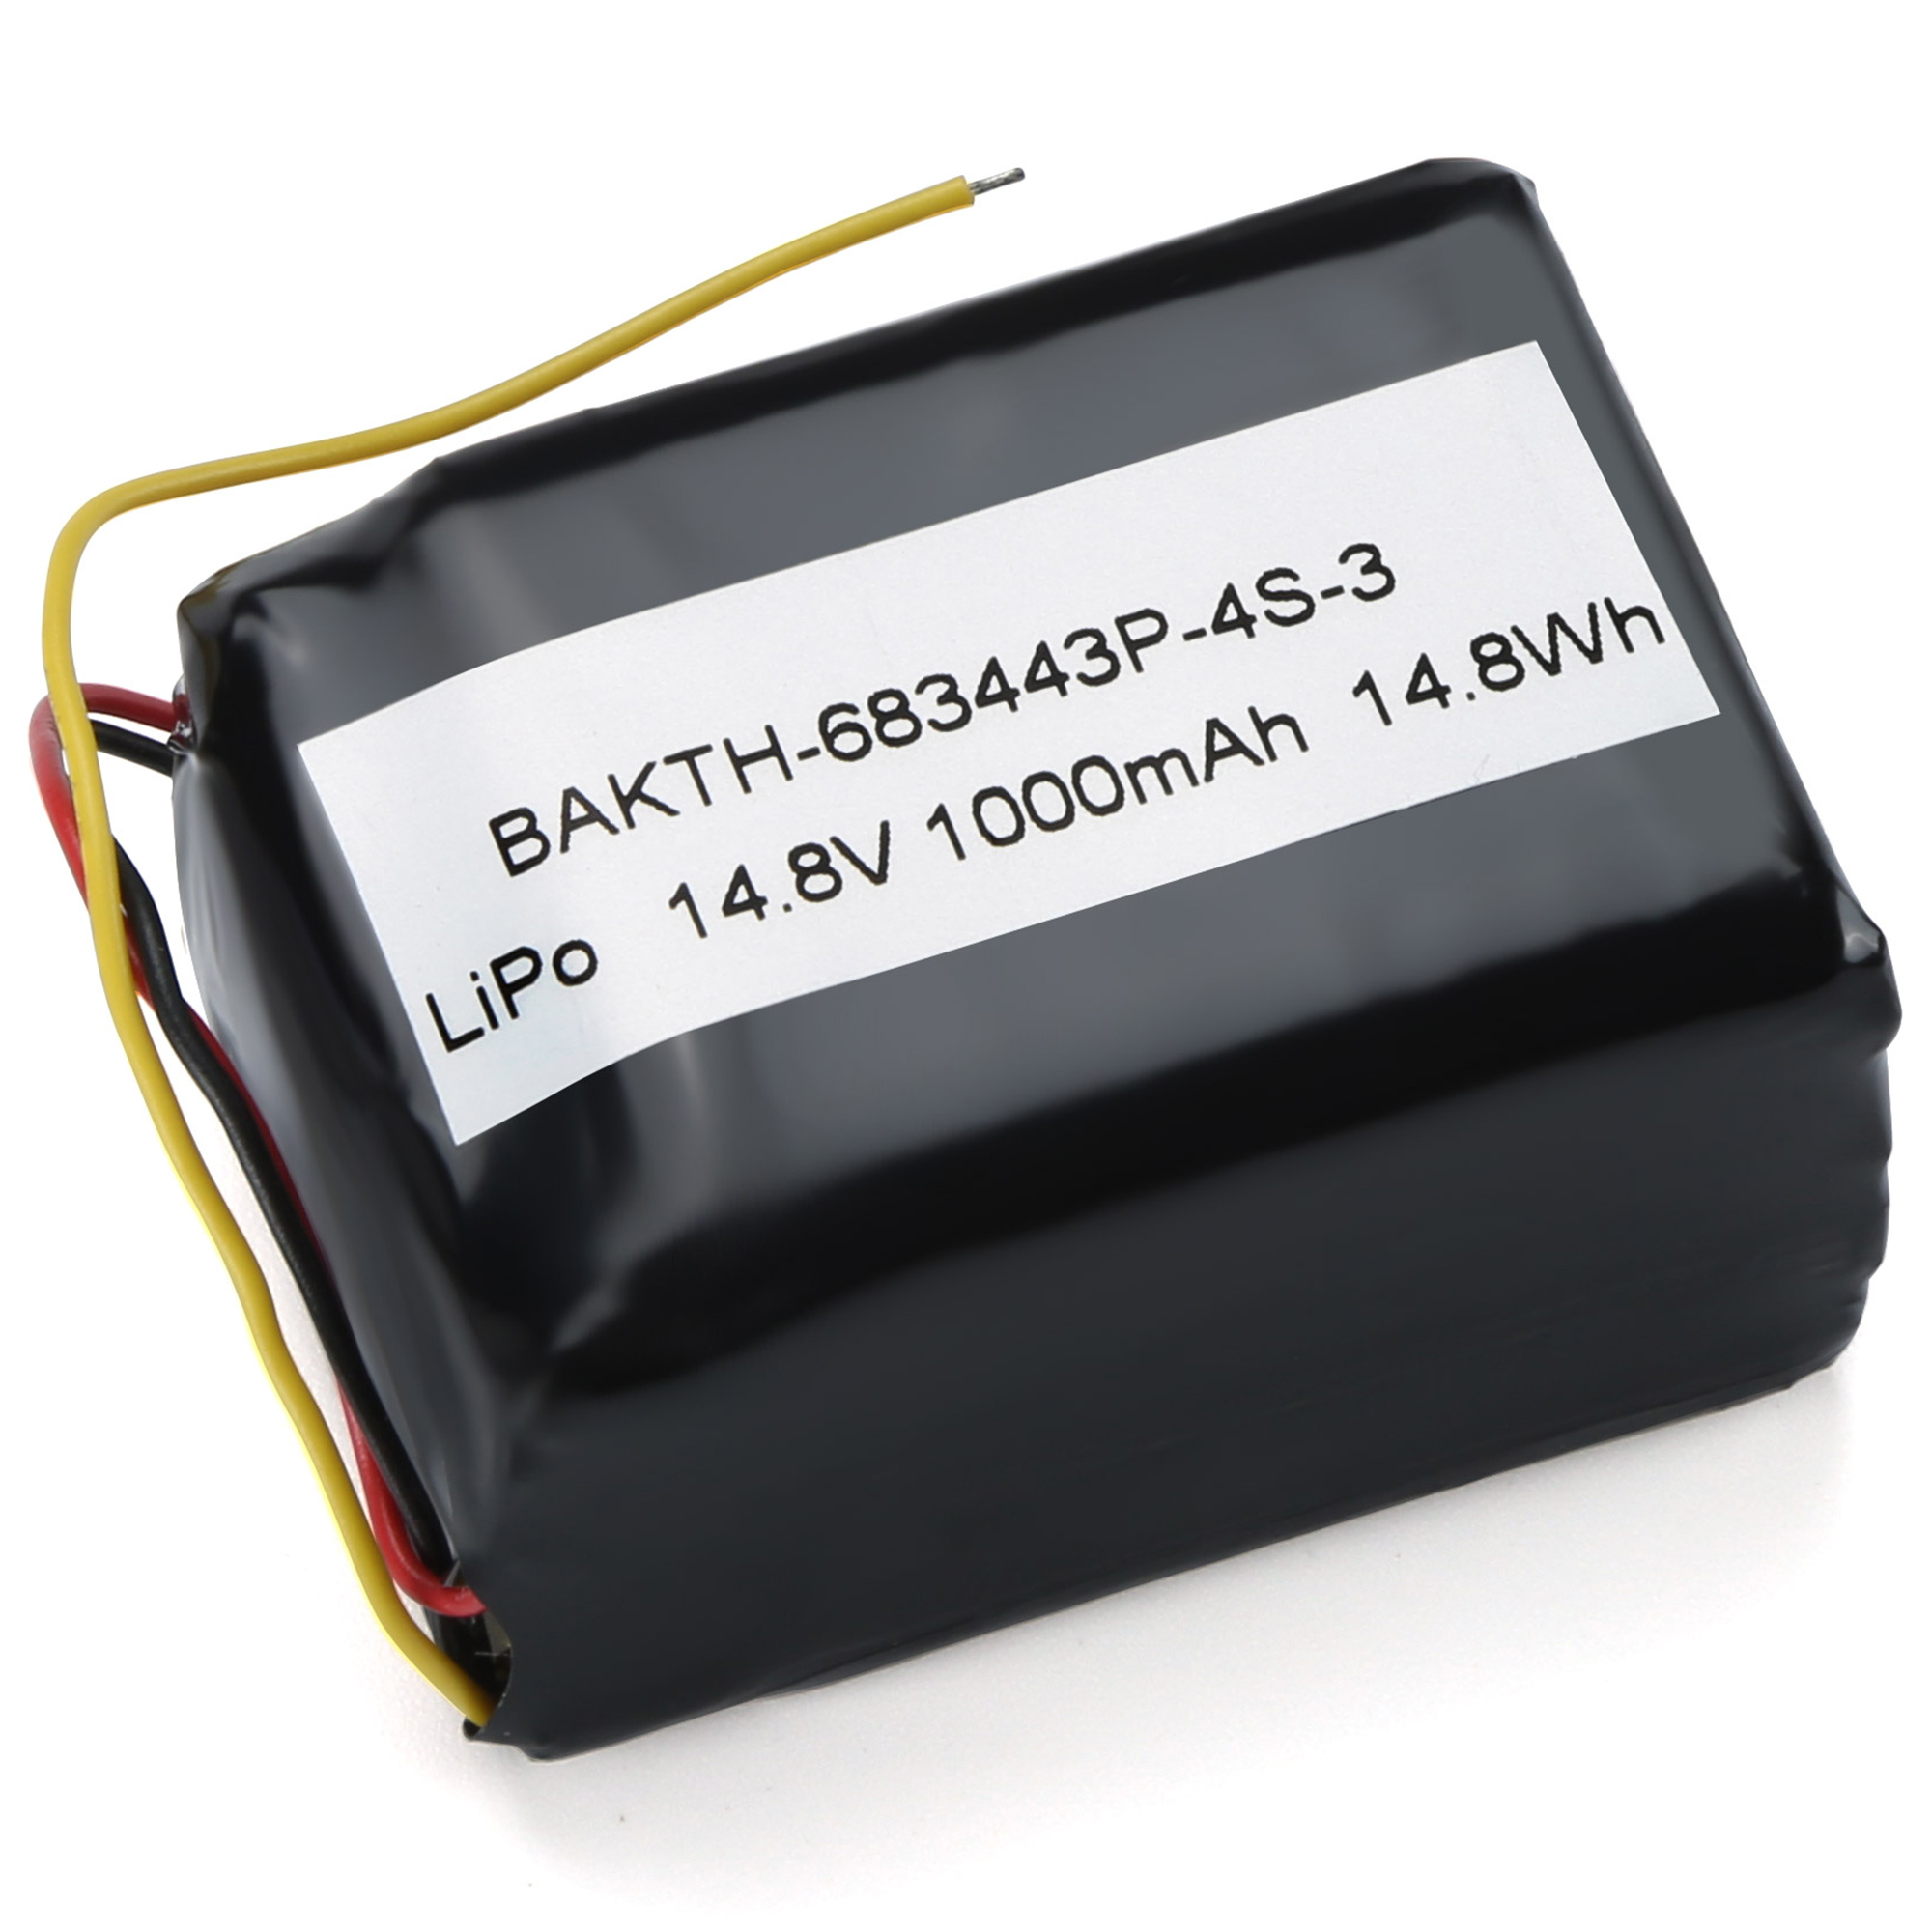 Bakth-683443P-4S-3 Rechargeable Long Life Life Lithium Polymer Battery 14.8V 1000mAH 